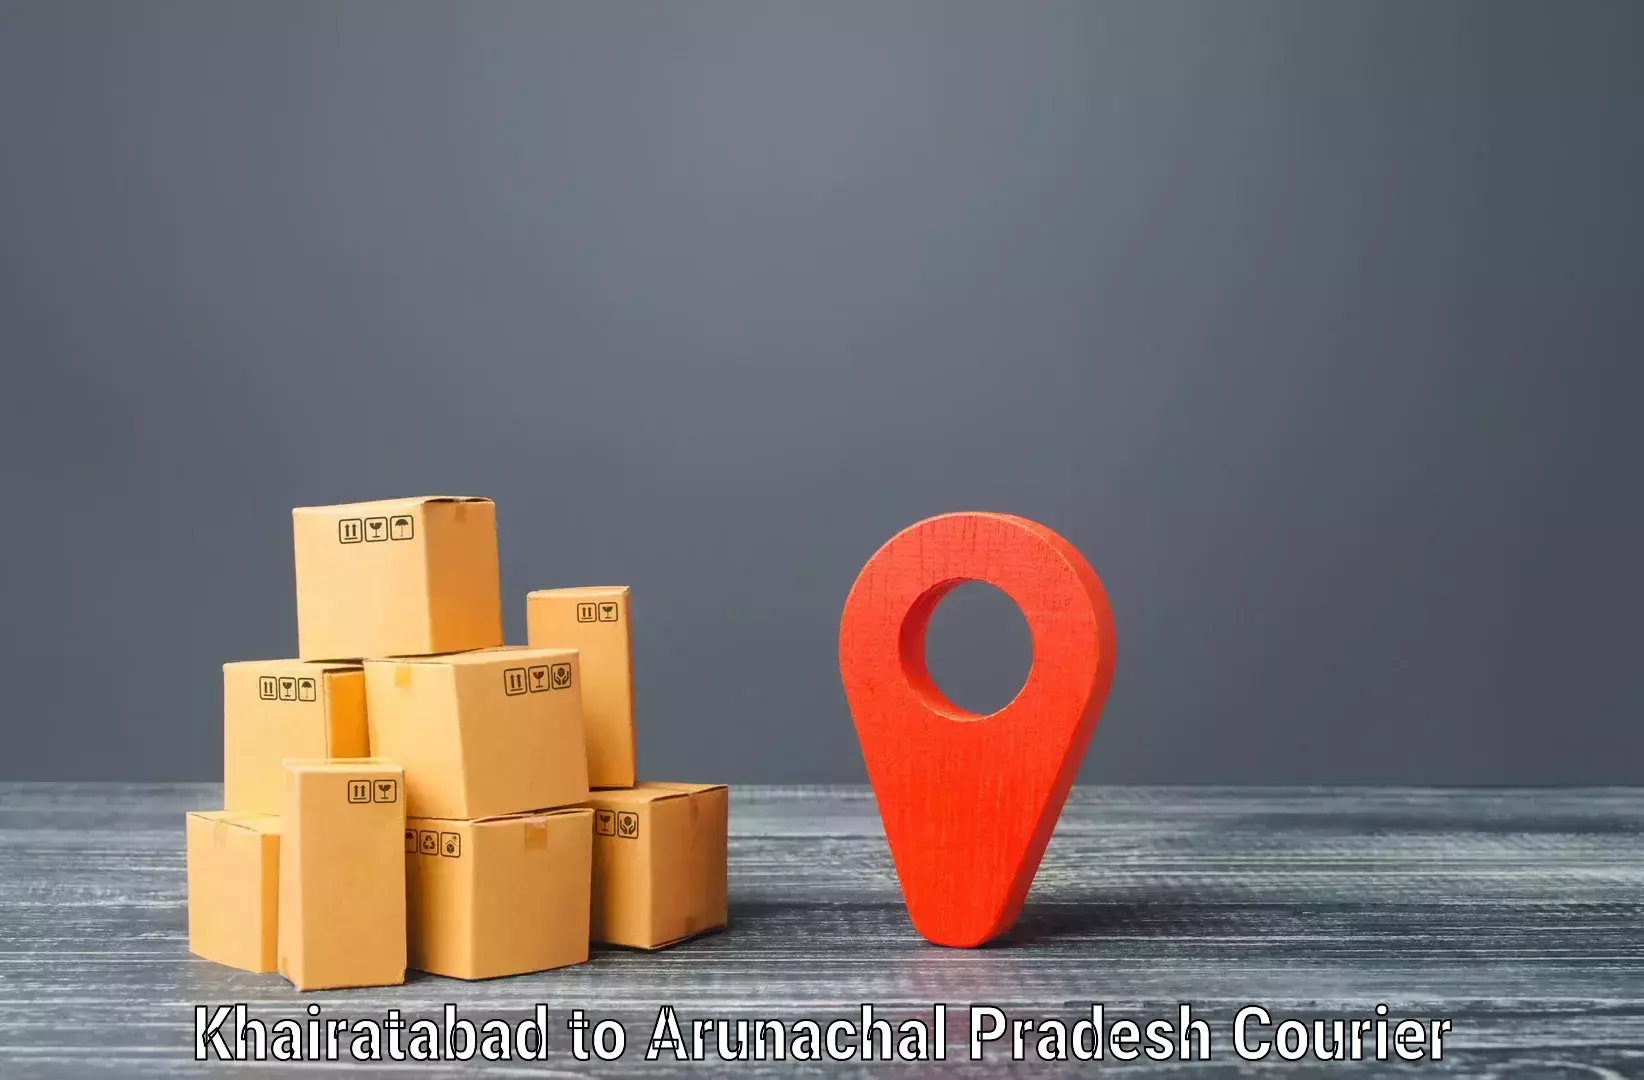 Courier service comparison in Khairatabad to Lohit